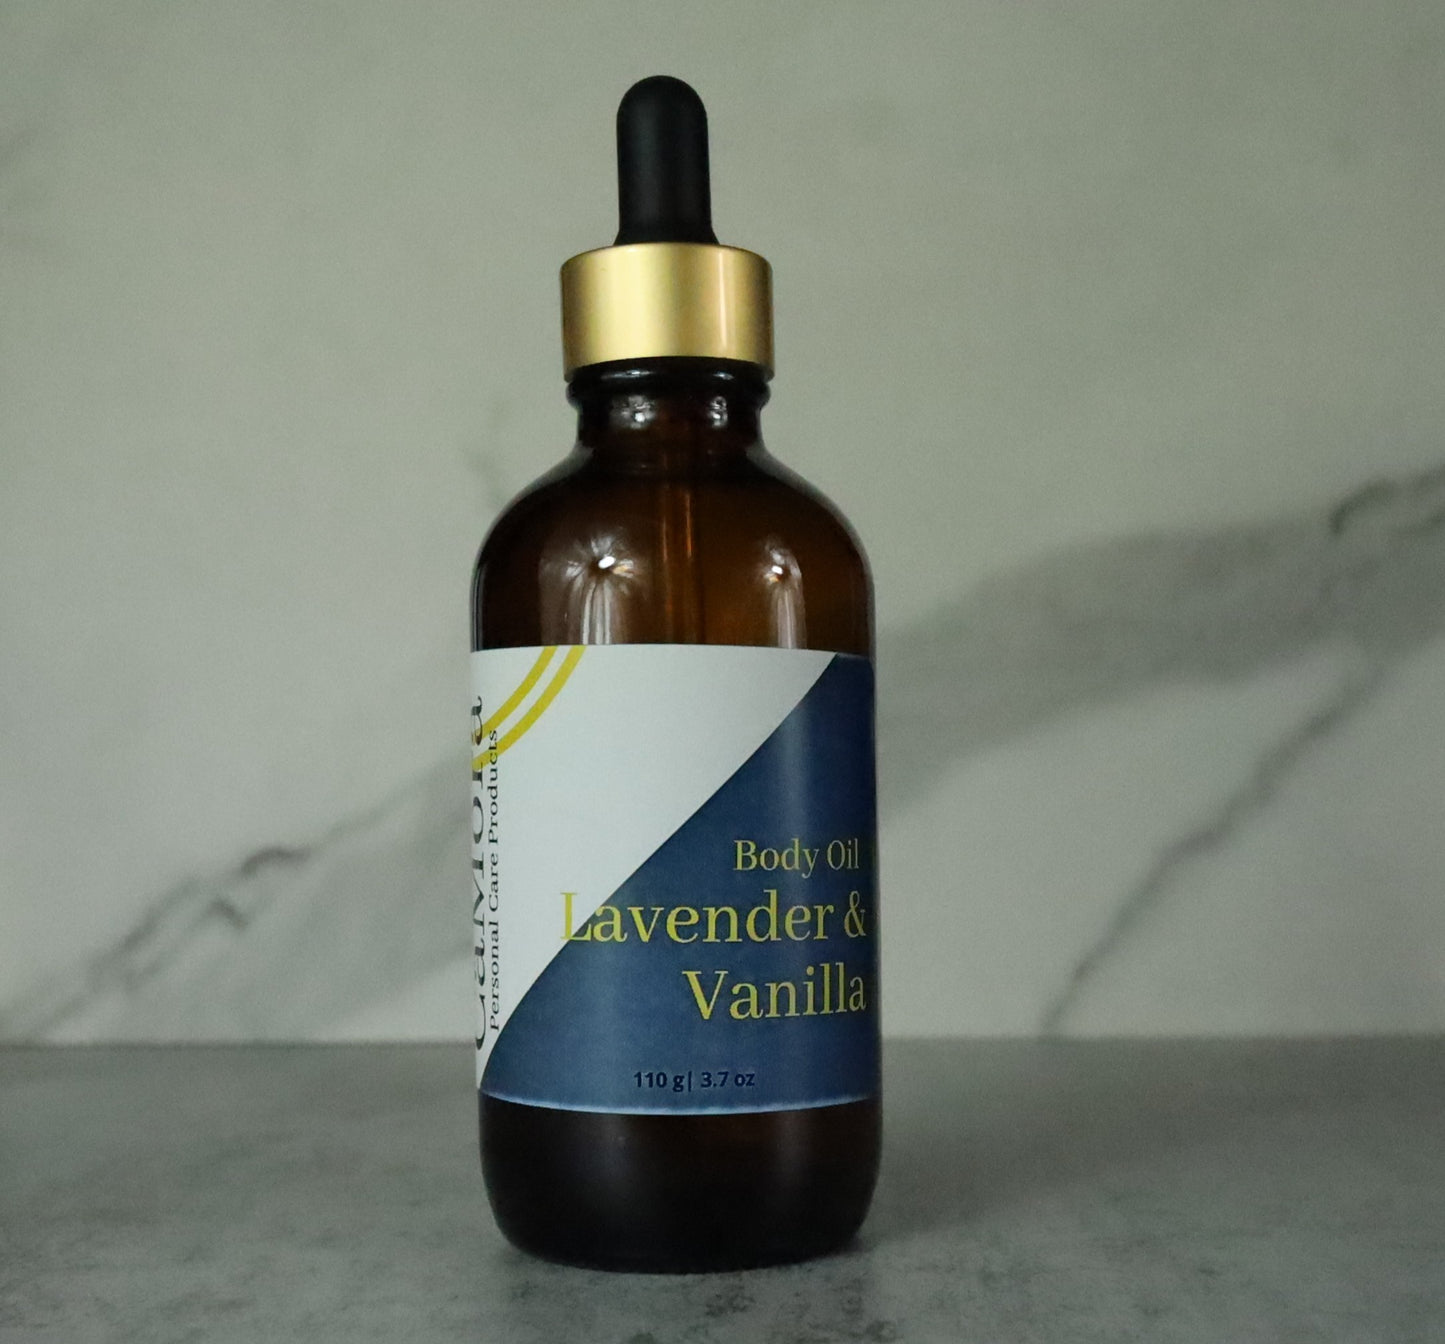 Lavender Vanilla organic body oil.  4 ounce bottle.  Infused with organic lavender and vanilla herbs.